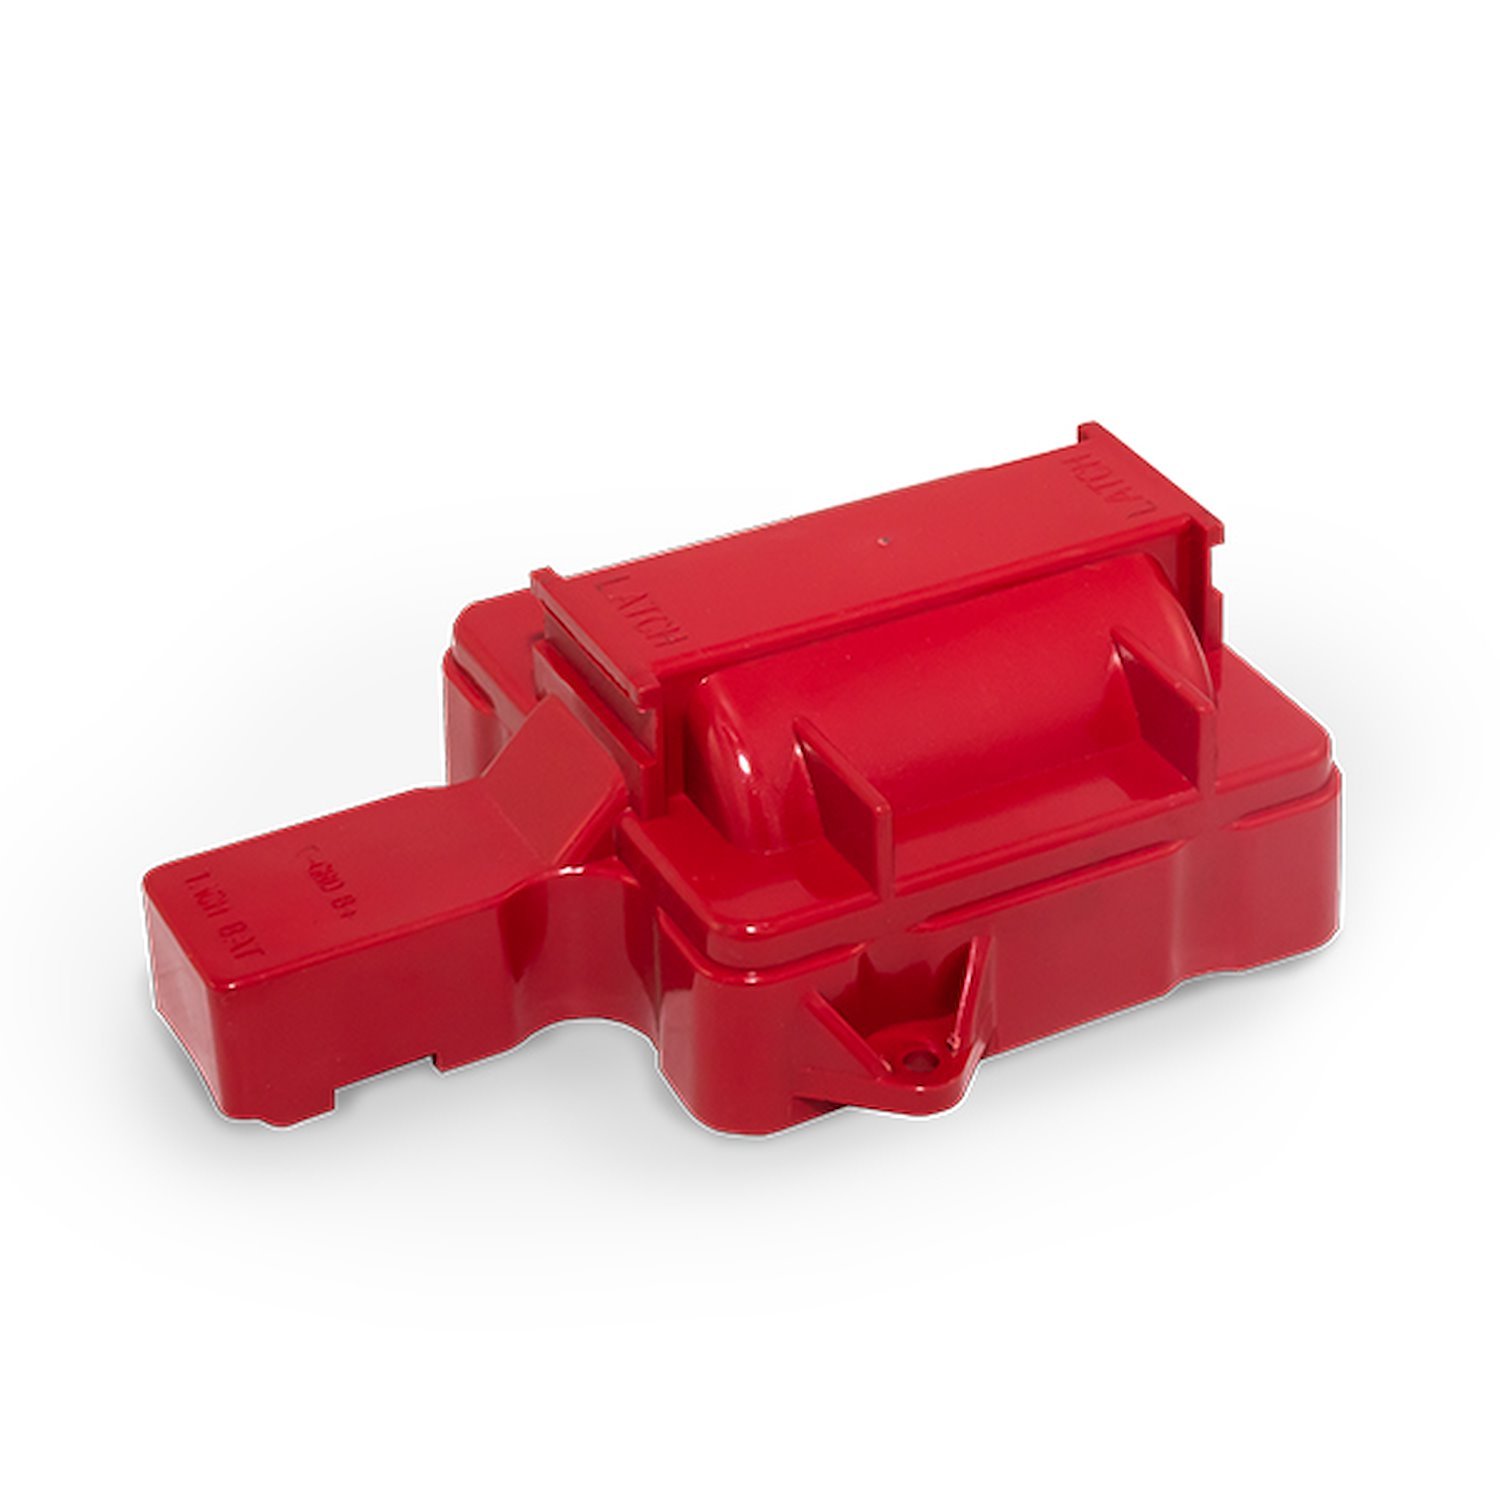 JM6903R HEI Distributor Coil Dust Cover, 8 Cylinder, Red